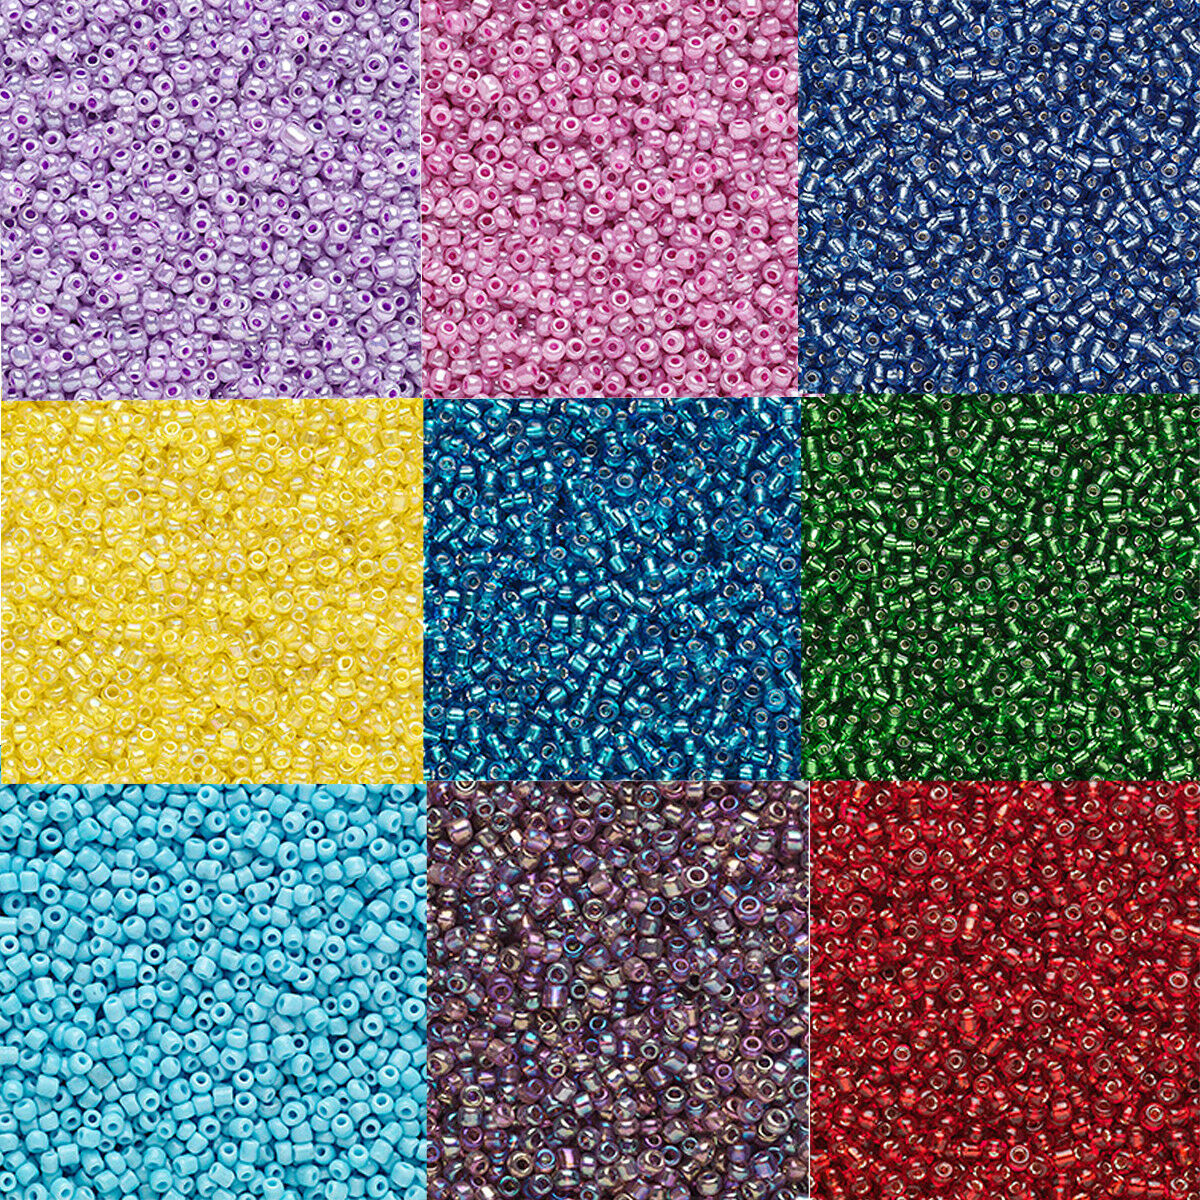 20 Grams ( 2000 Beads ) Tiny 11/0 Round Glass Seed Beads Loose # 11 Opaque Color